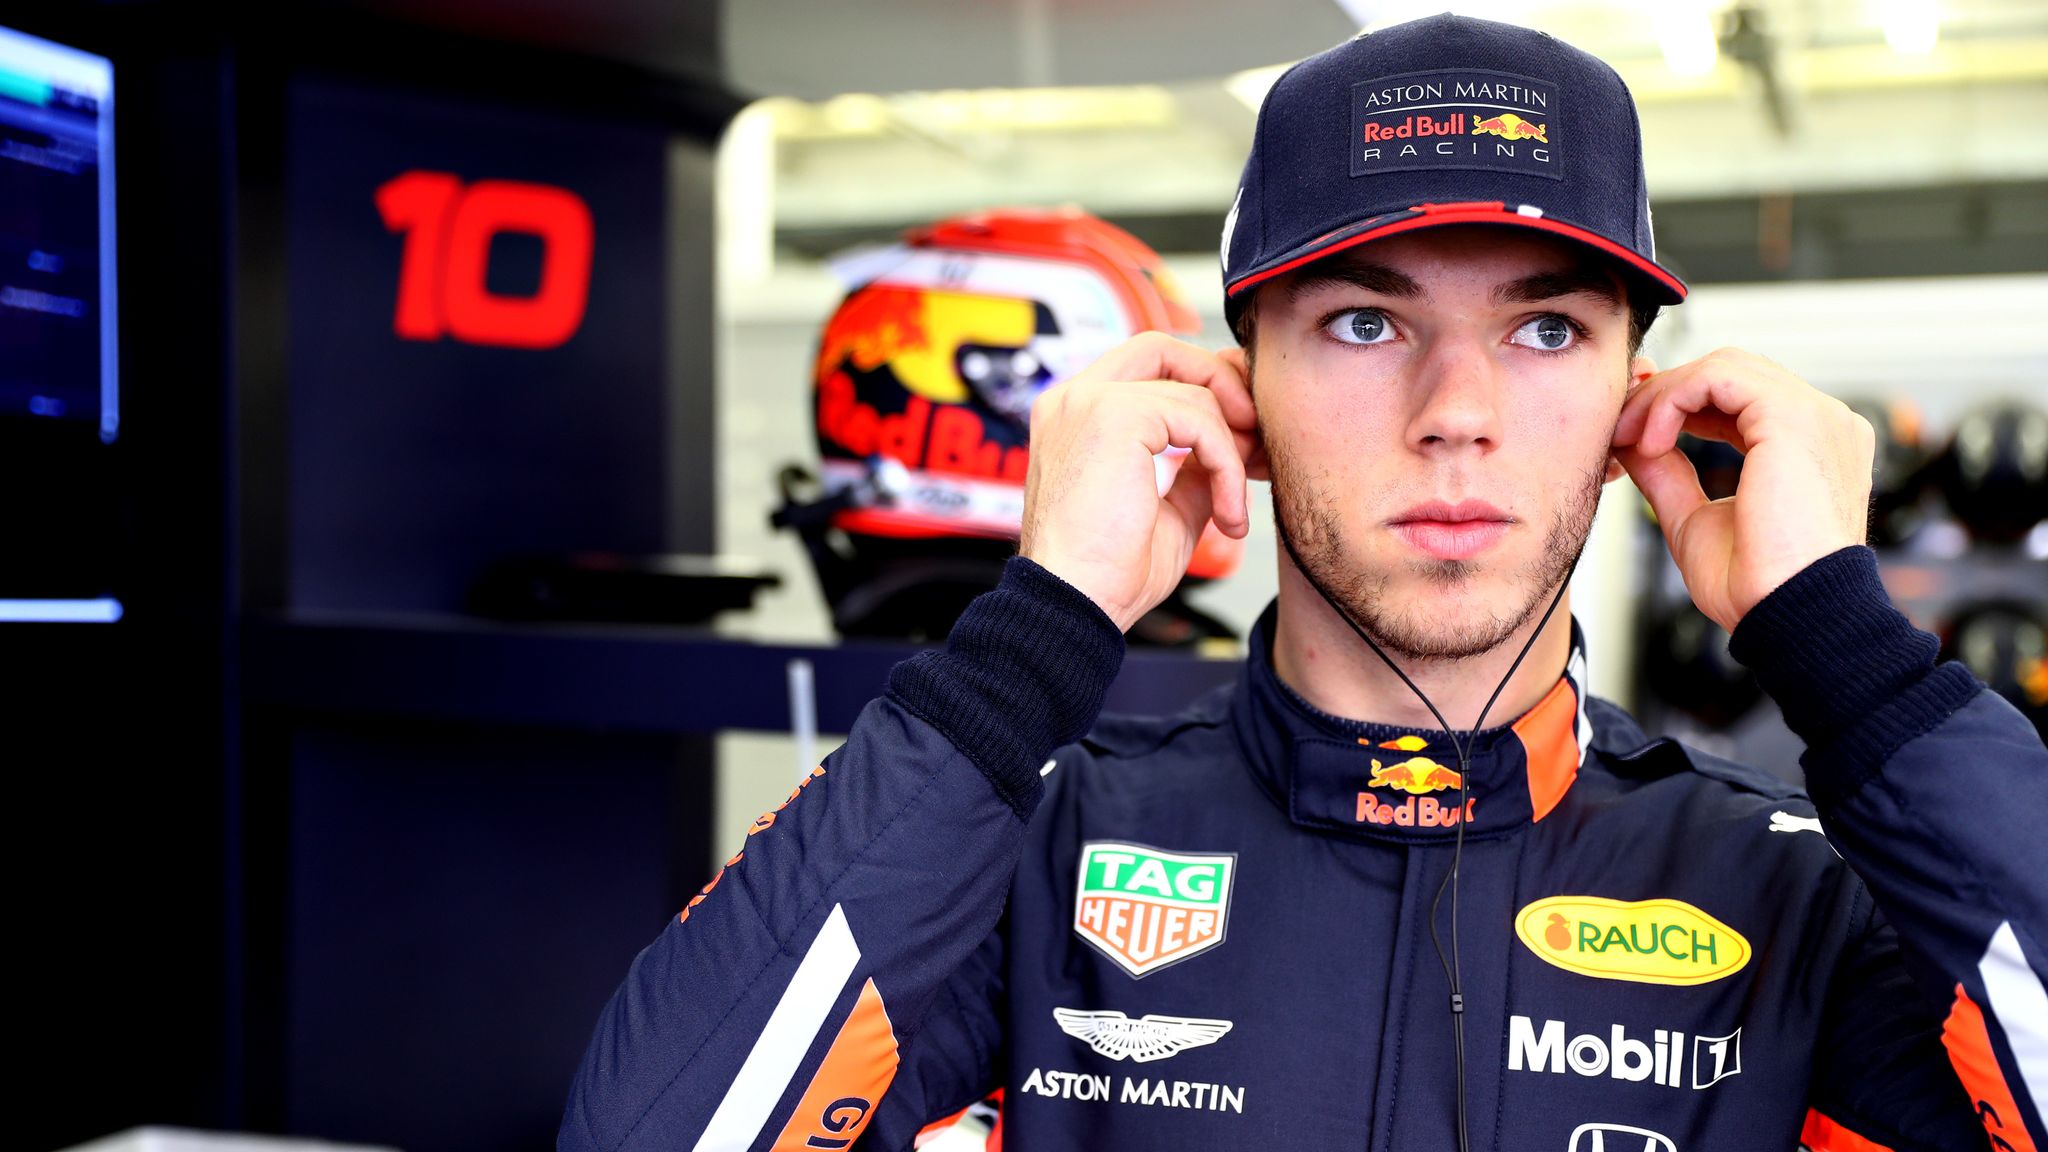 Pierre Gasly of Red after start | F1 News